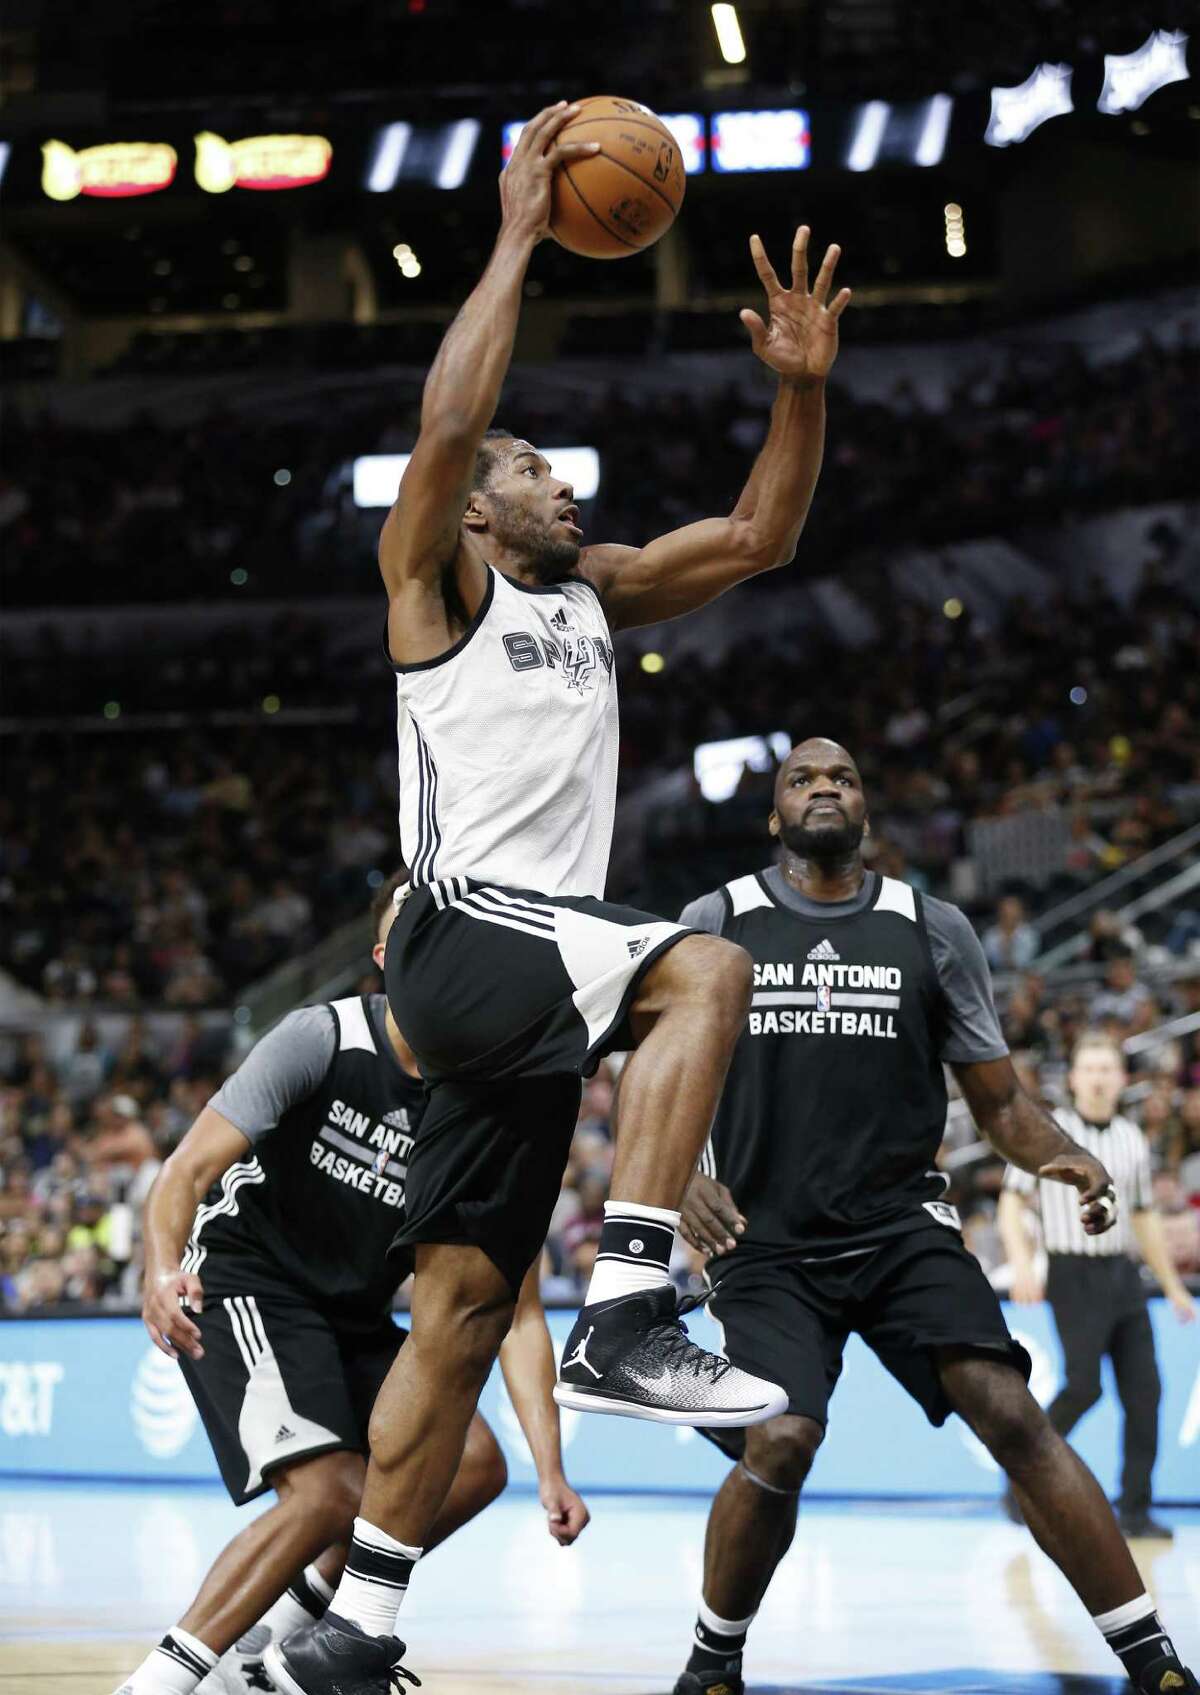 Kawhi Leonard goes up for a shot against Joel Anthony (right) during the Spurs’ Silver and Black open scrimmage at the AT&T Center on Tuesday, Oct. 18, 2016. (Kin Man Hui/San Antonio Express-News)